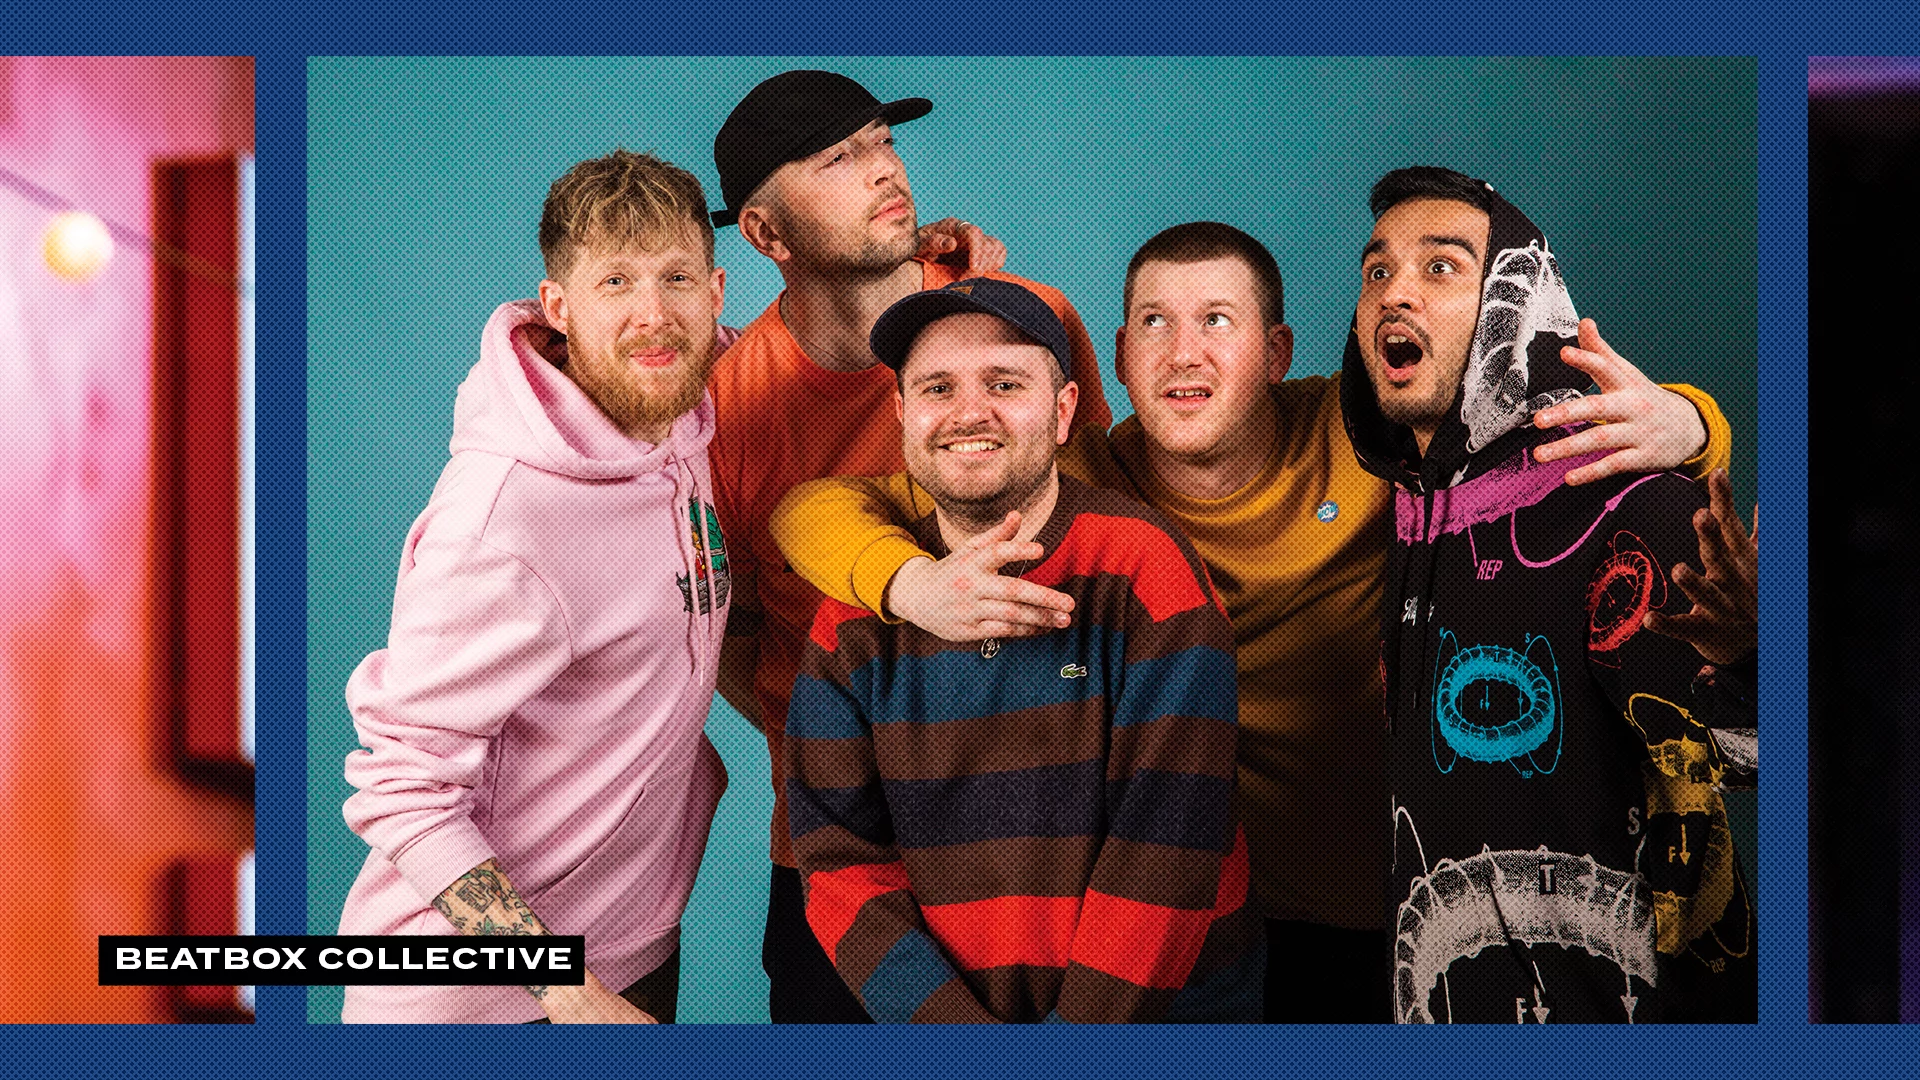 The Beatbox Collective